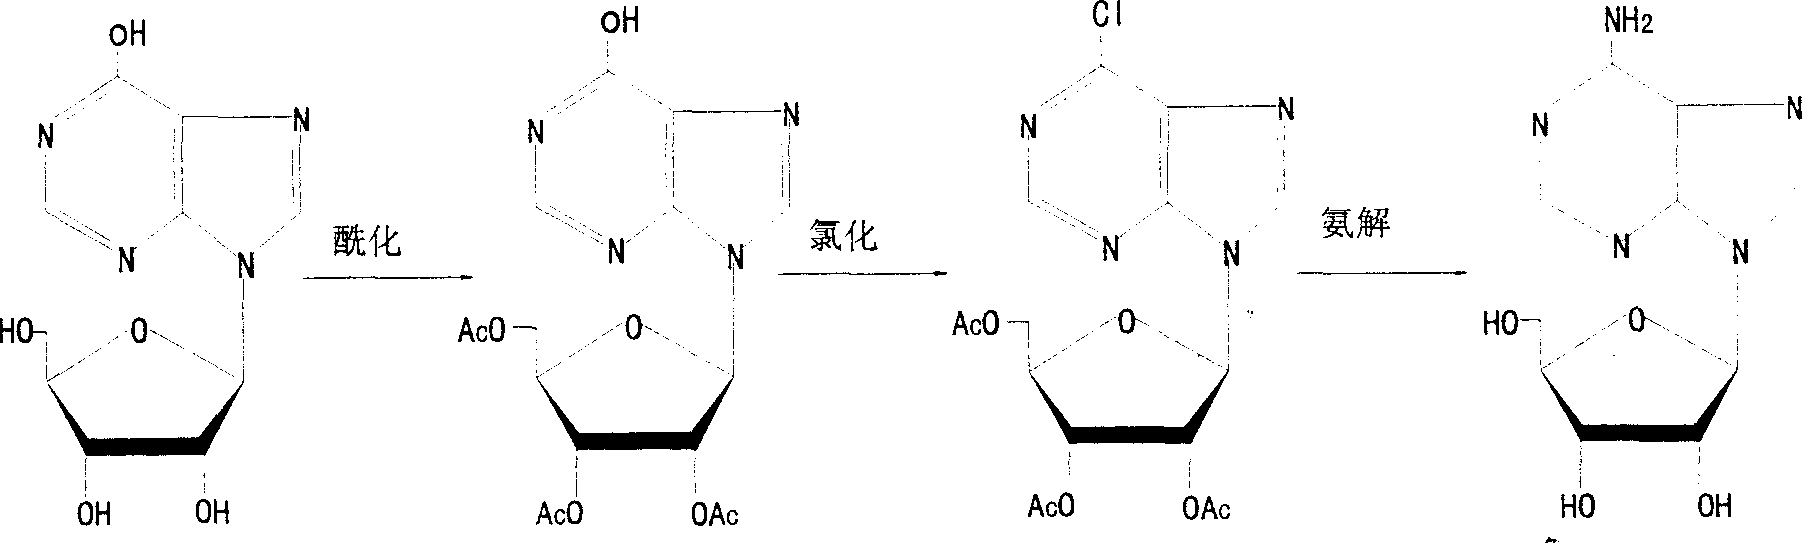 Technique of chemical synthesis of producing adenosine